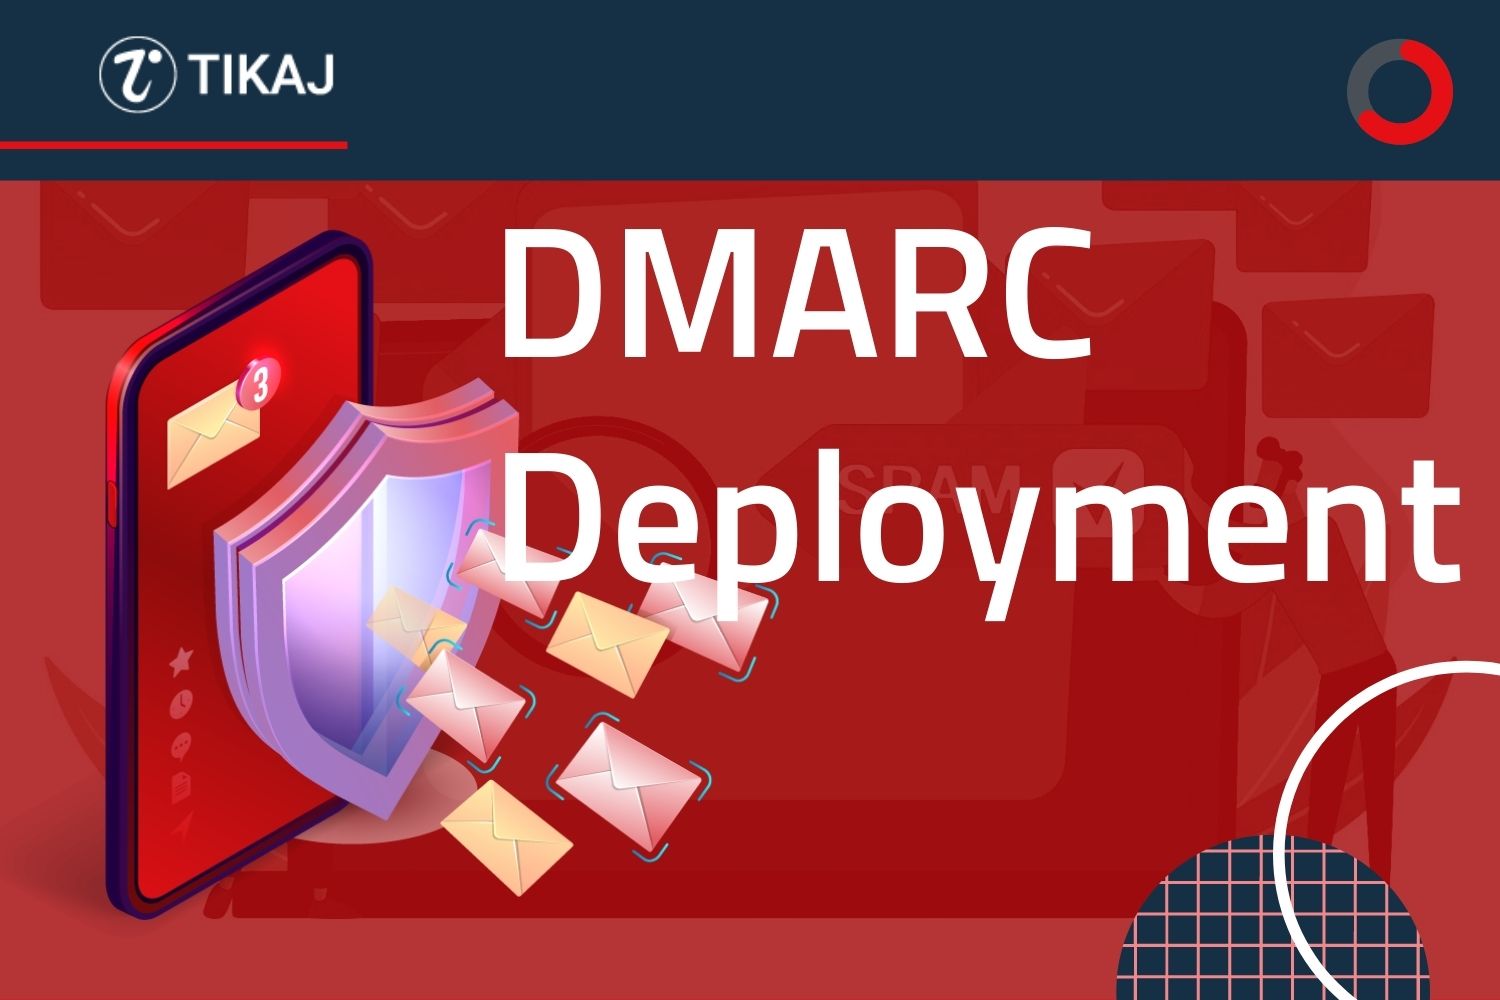 How to do DMARC Deployment easily in 2021?